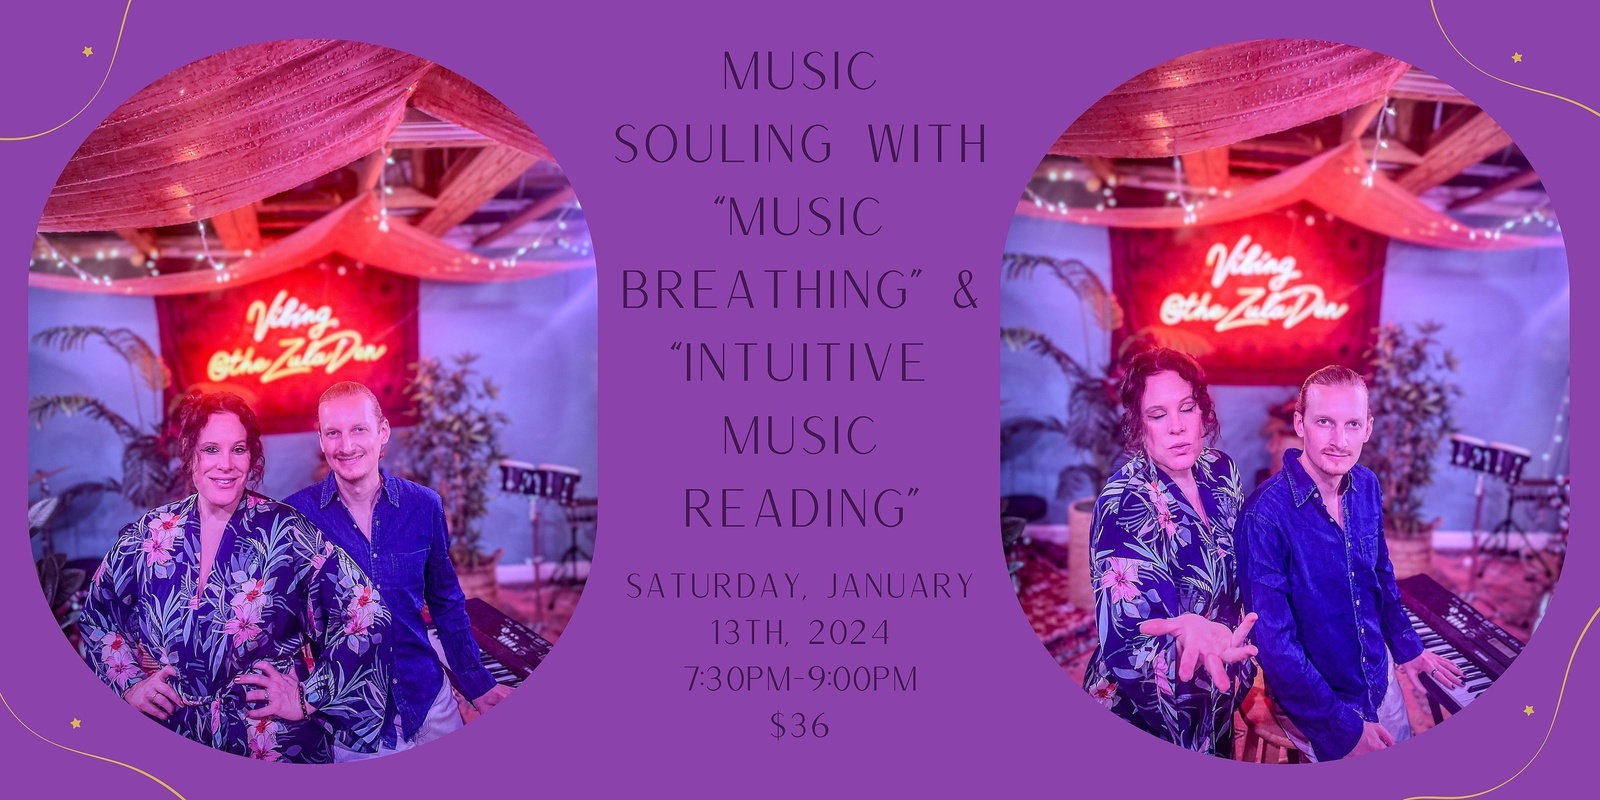 Banner image for MUSIC SOULING with “Music Breathing” & “Intuitive Music Reading”